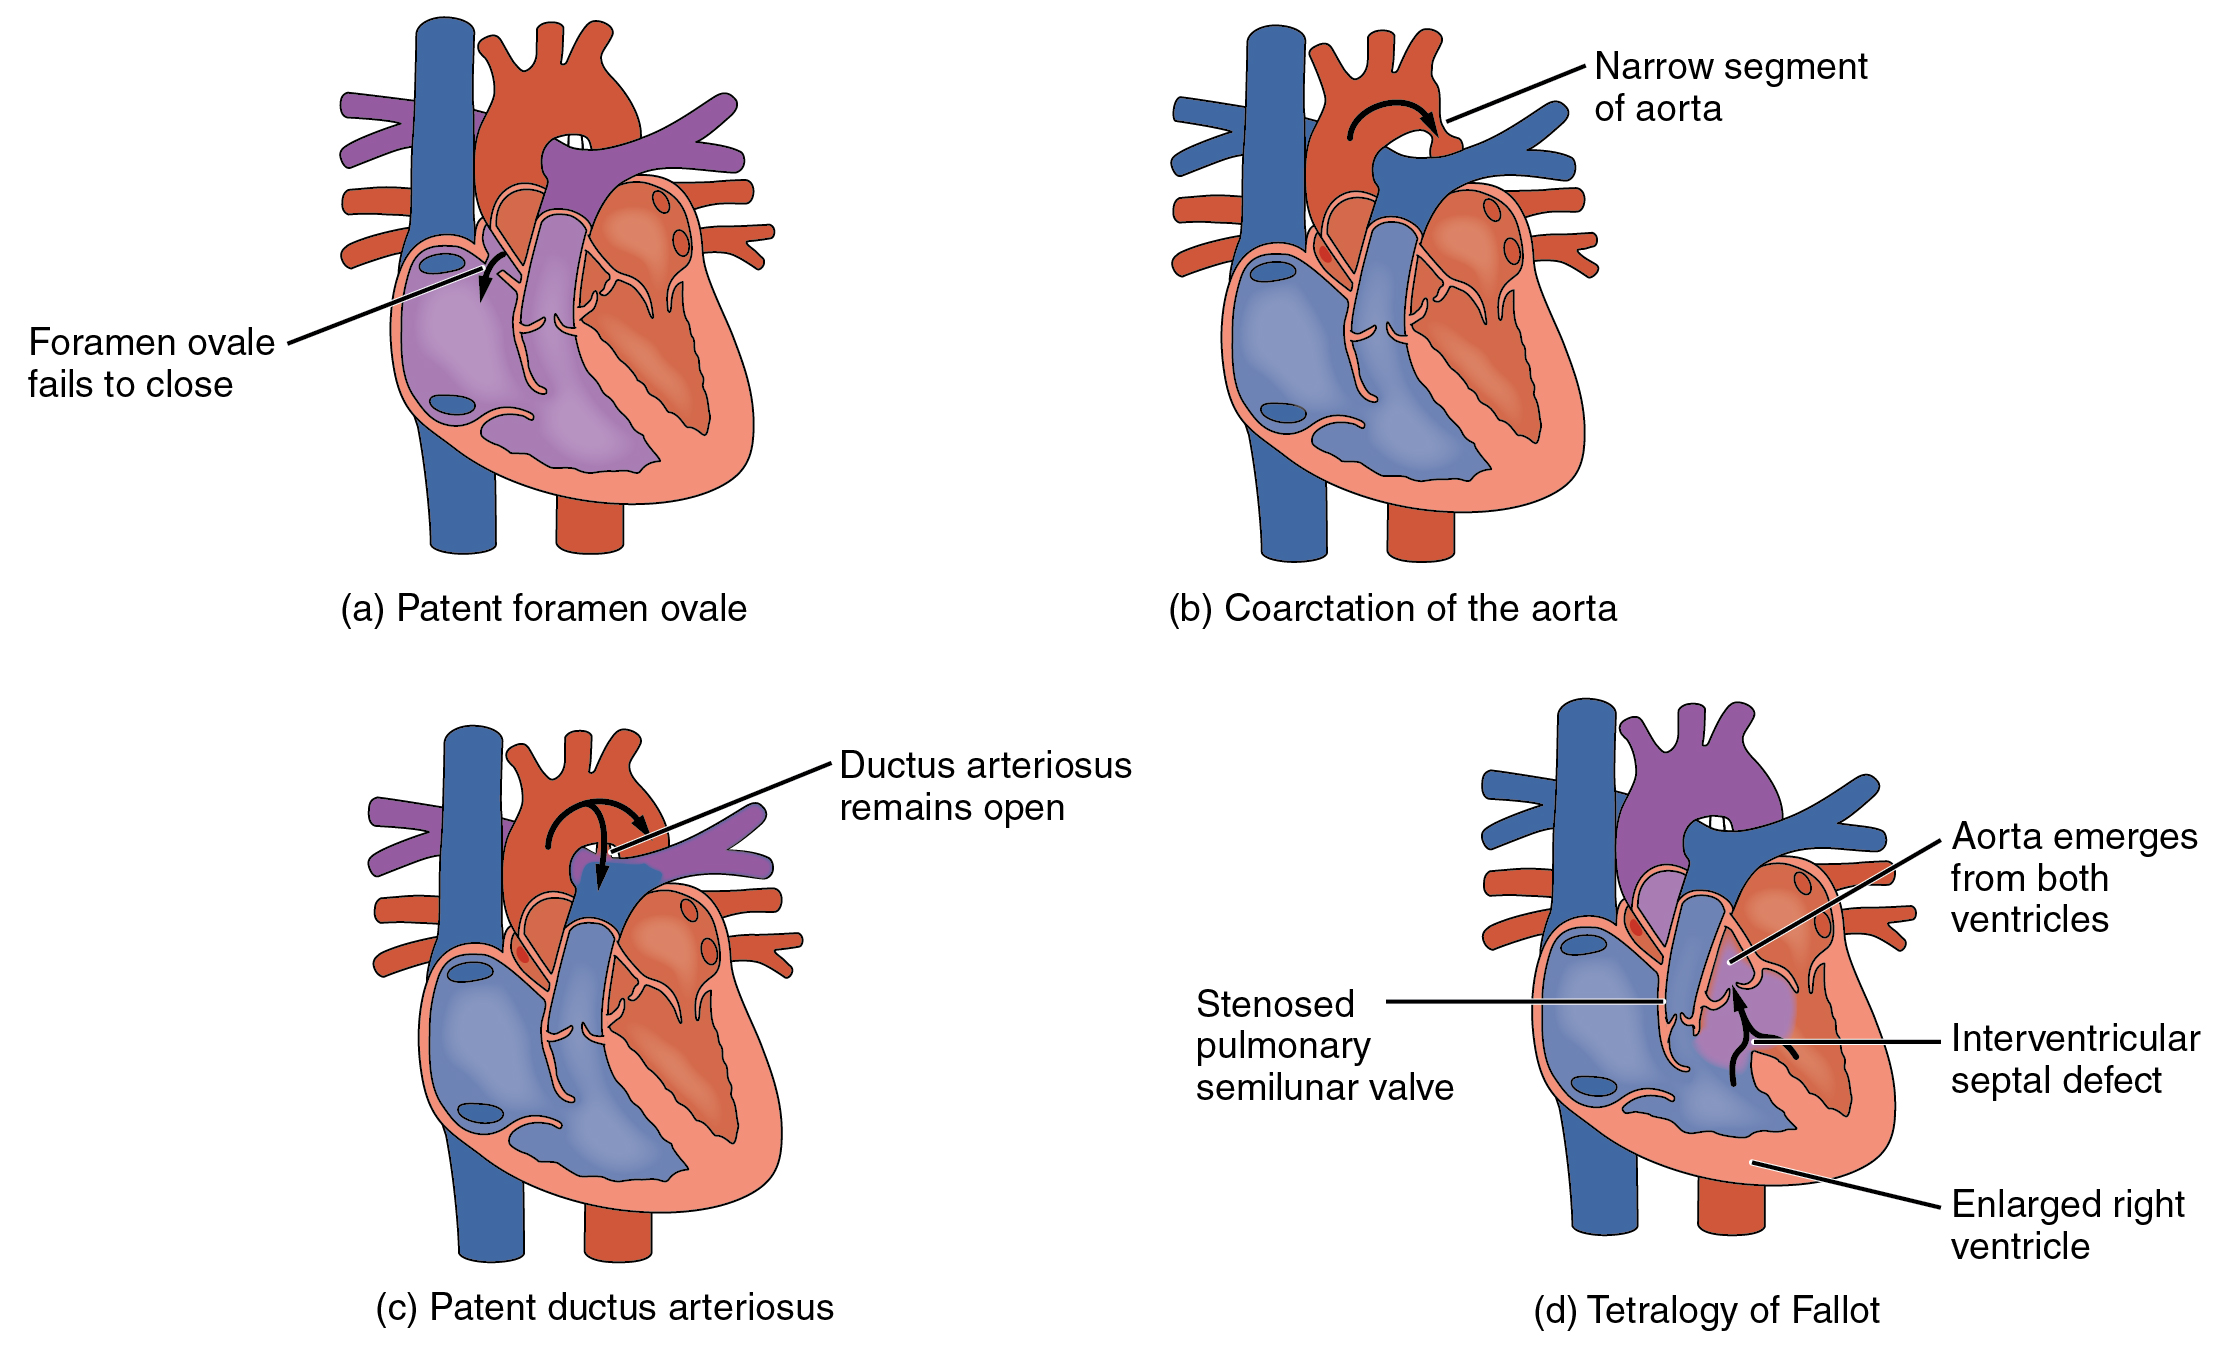 Diagrams illustrating the abnormal anatomy associated with several common congenital defects of the heart.